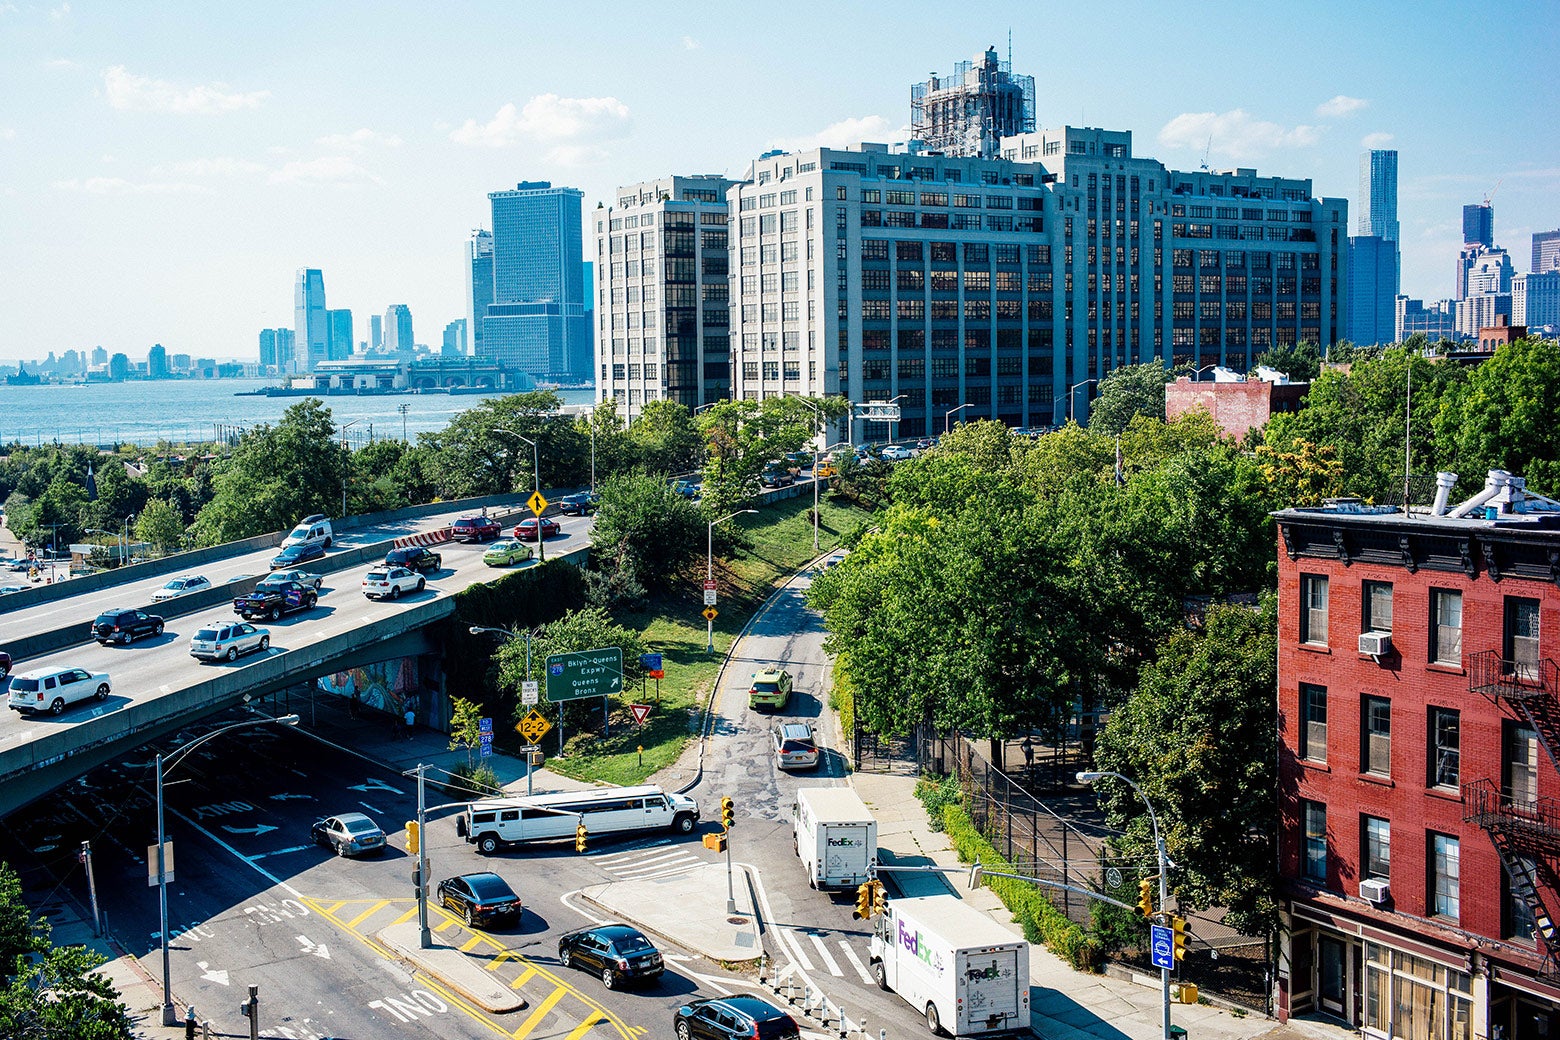 Vehicles enter the Brooklyn–Queens Expressway along Atlantic Avenue on Aug. 15, 2015 in Brooklyn, New York City.